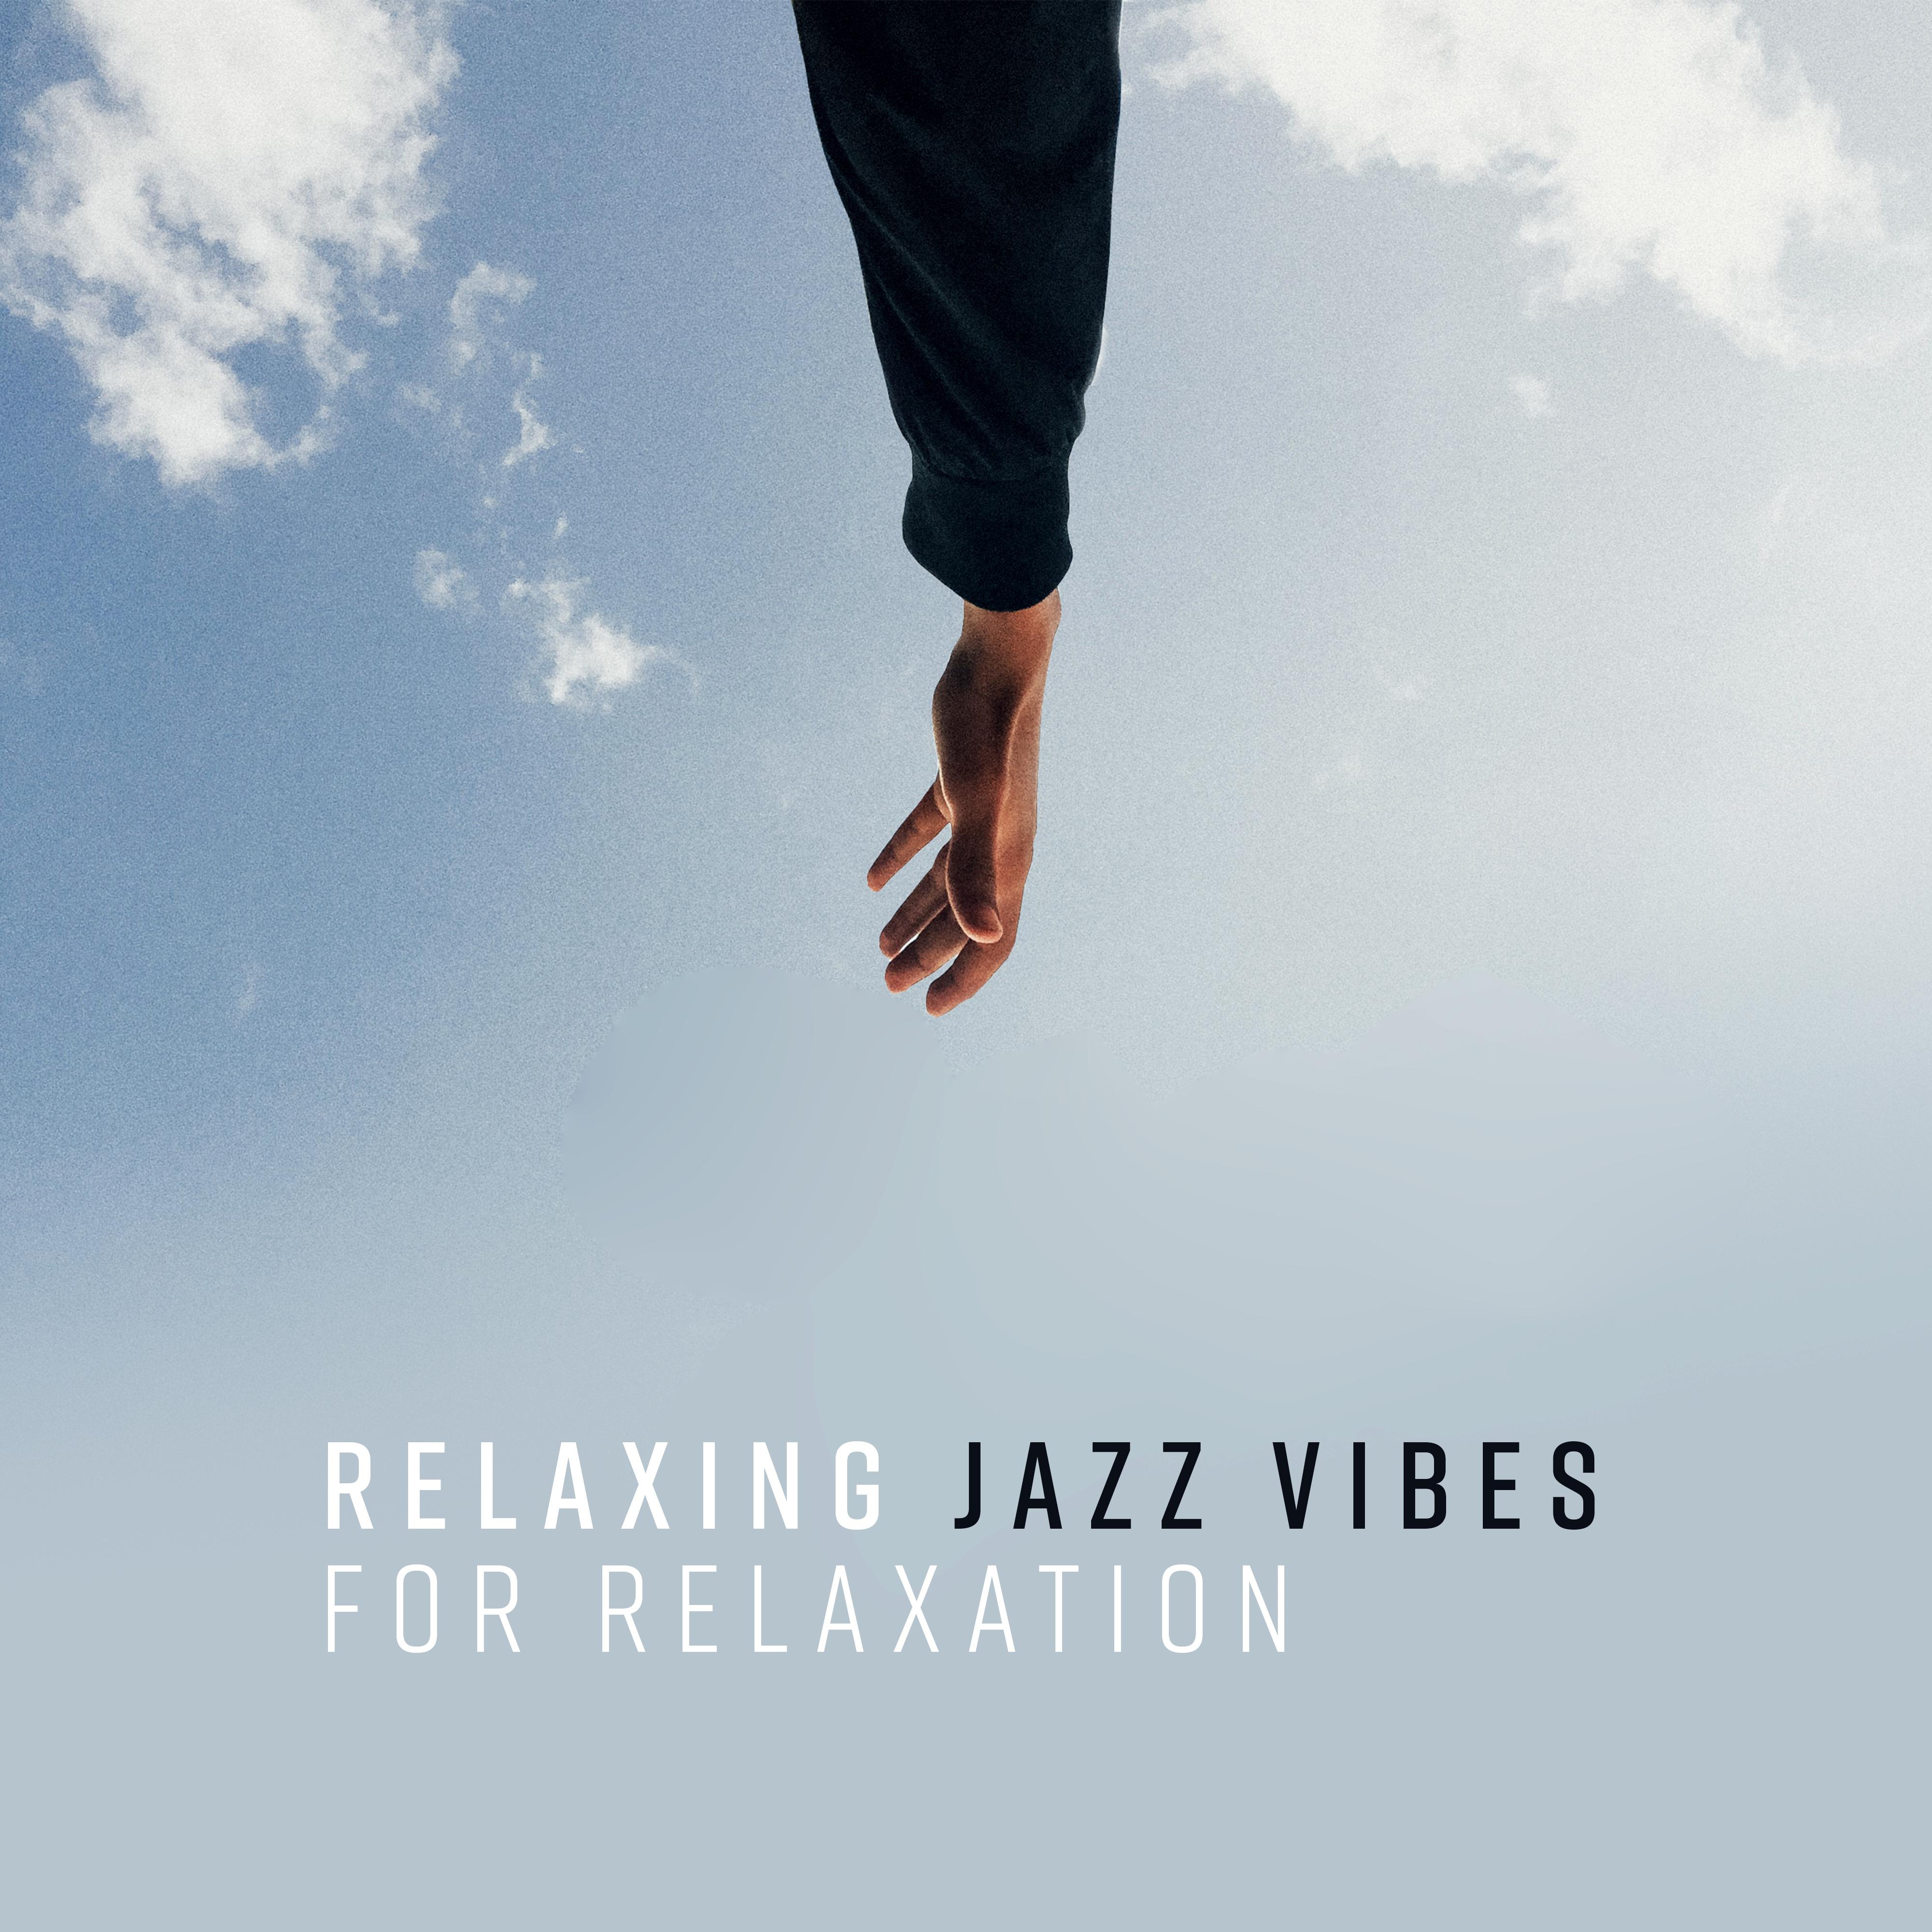 Relaxing Jazz Vibes for Relaxation